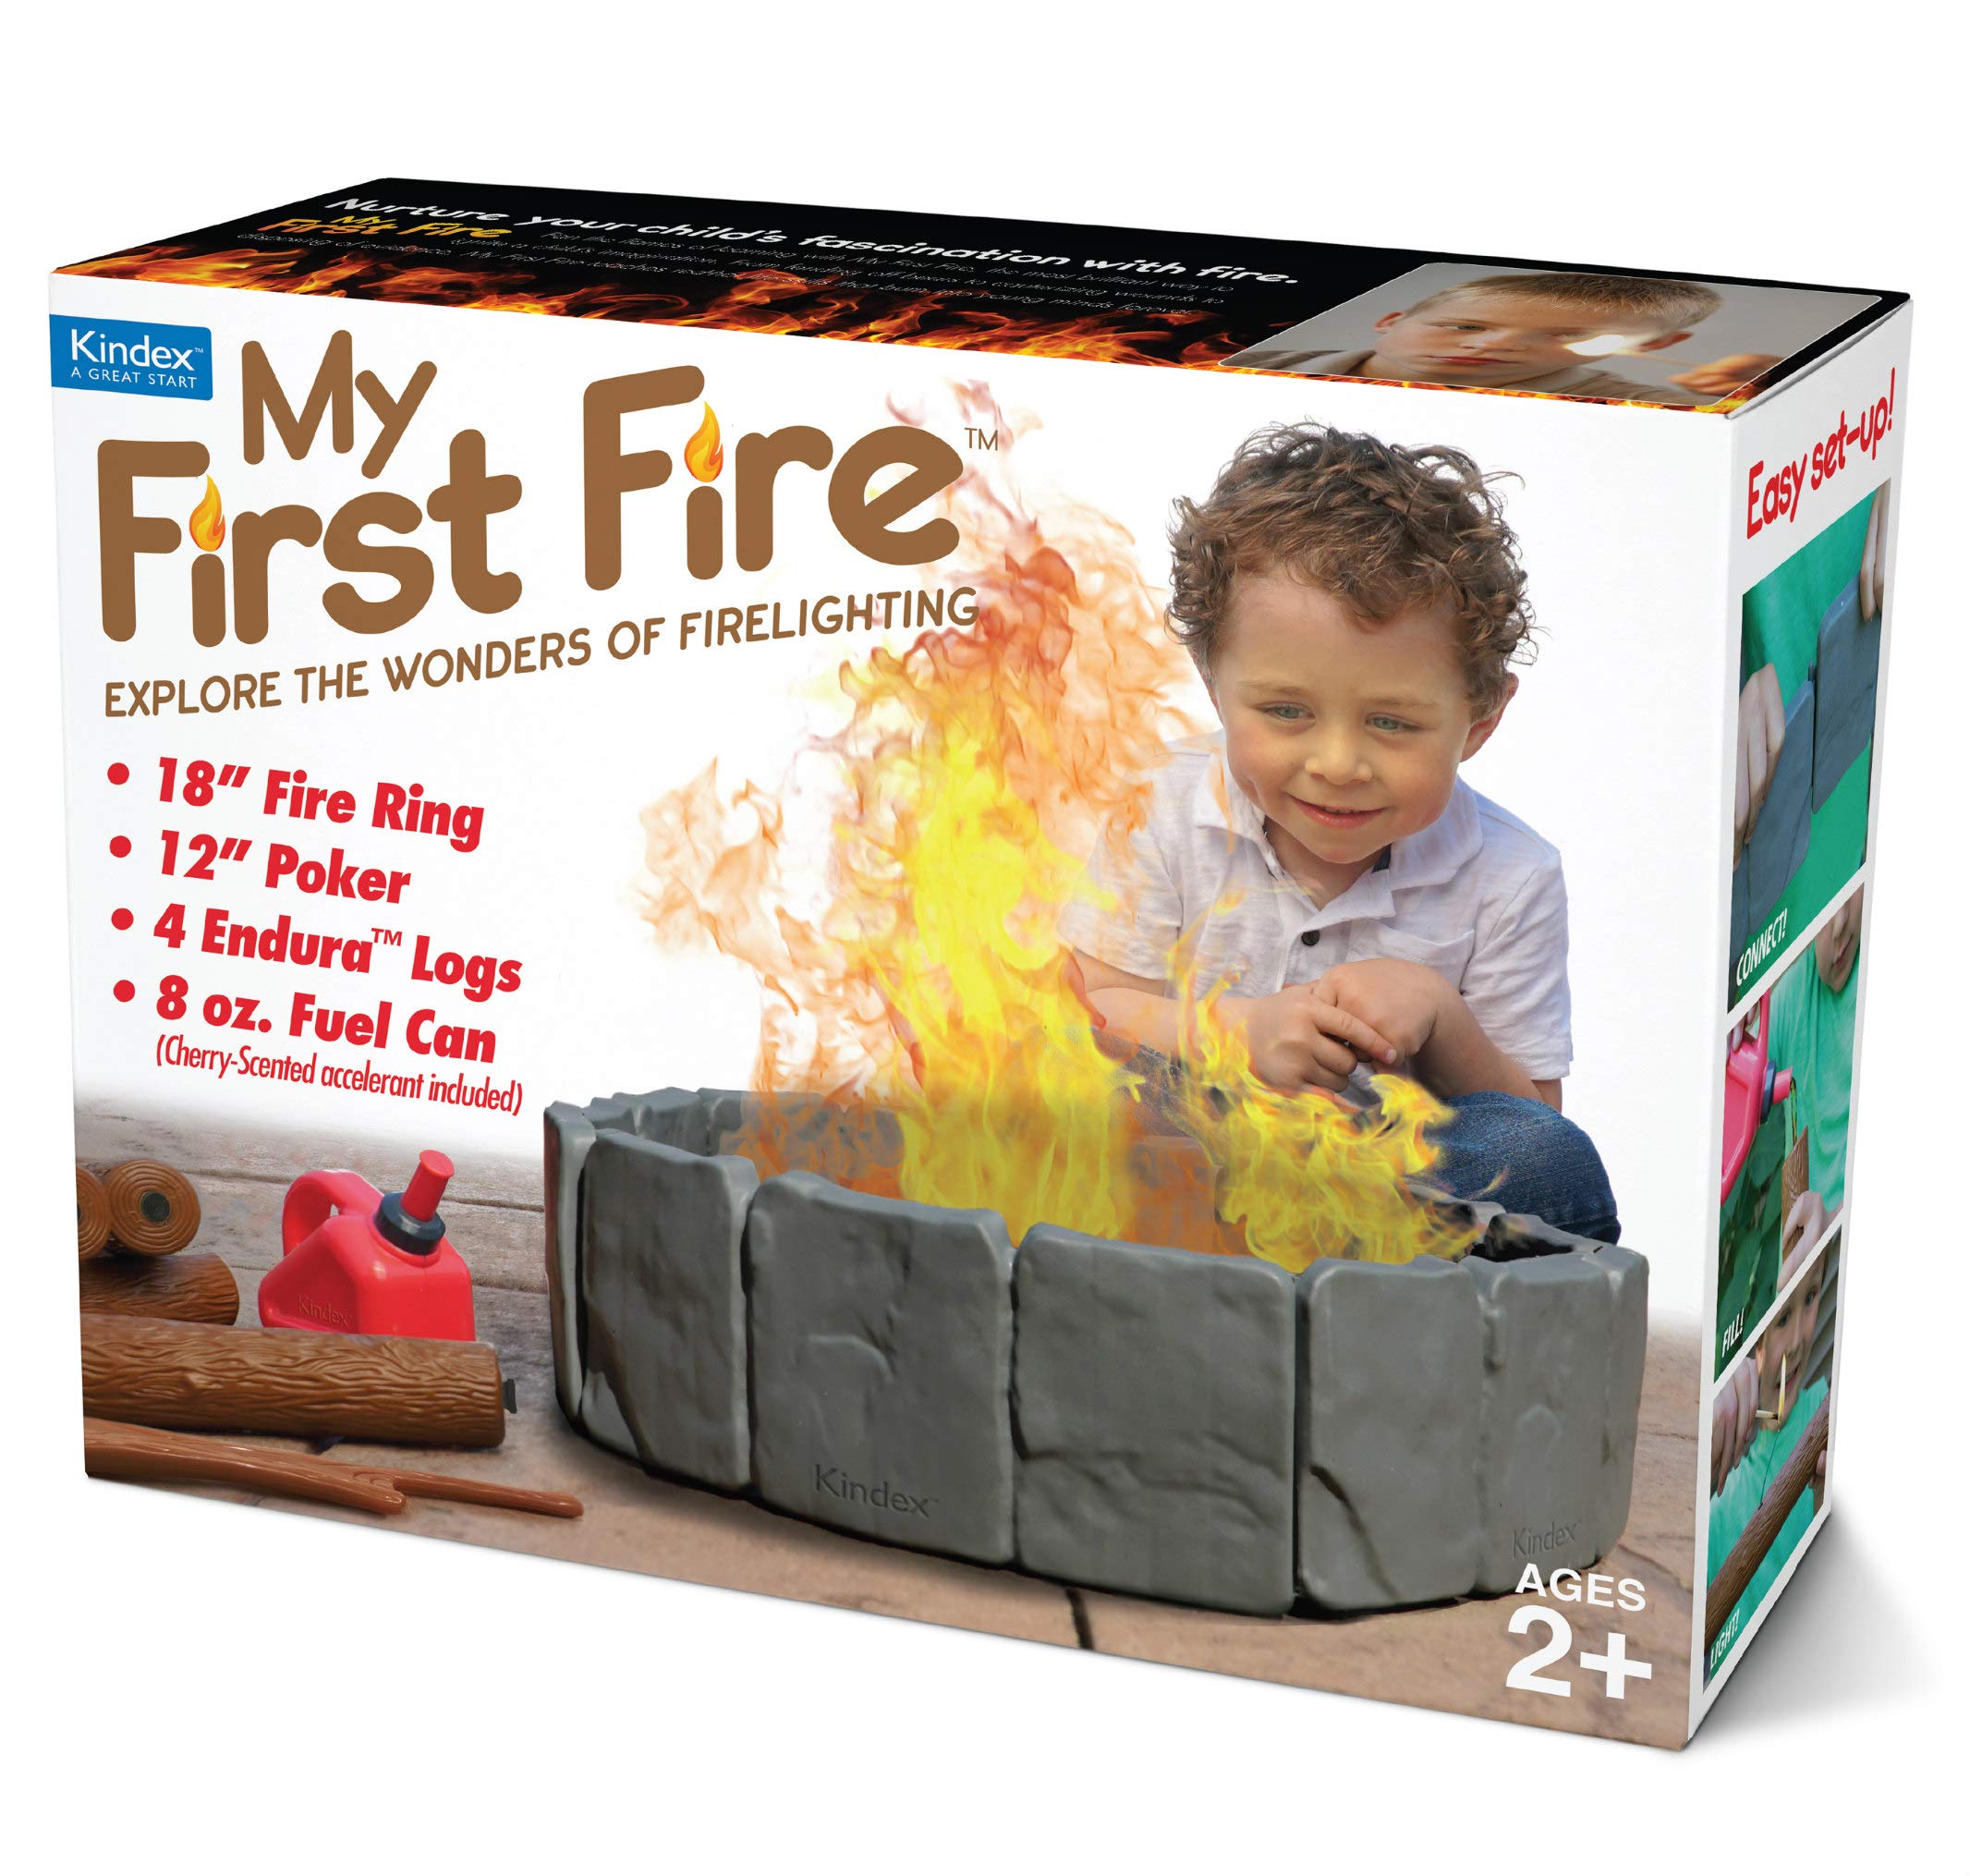 Prank Pack, My First Fire Prank Gift Box, Wrap Your Real Present in a Funny Authentic Prank-O Gag Novelty Gifting Box for Pranksters